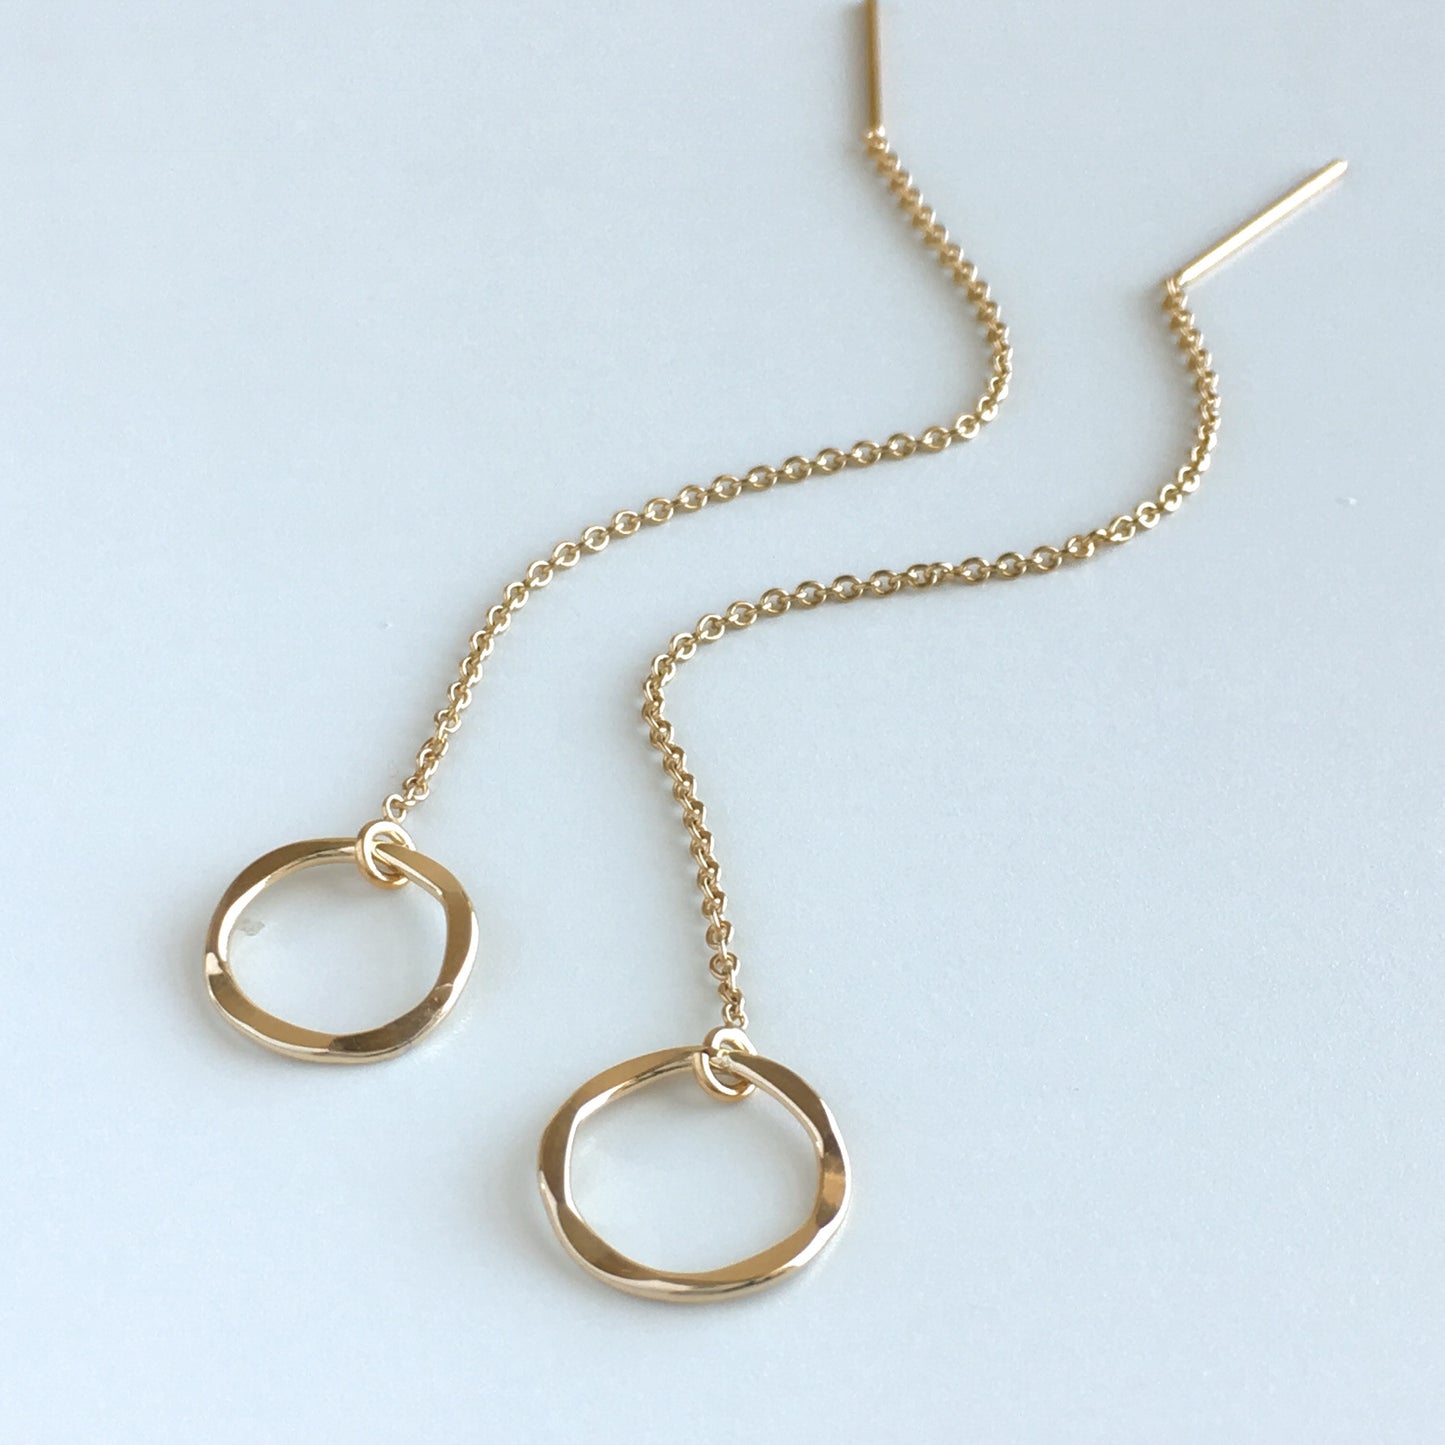 Hammered Circle Dainty Threader Earrings - 14k Gold Filled or Sterling Silver